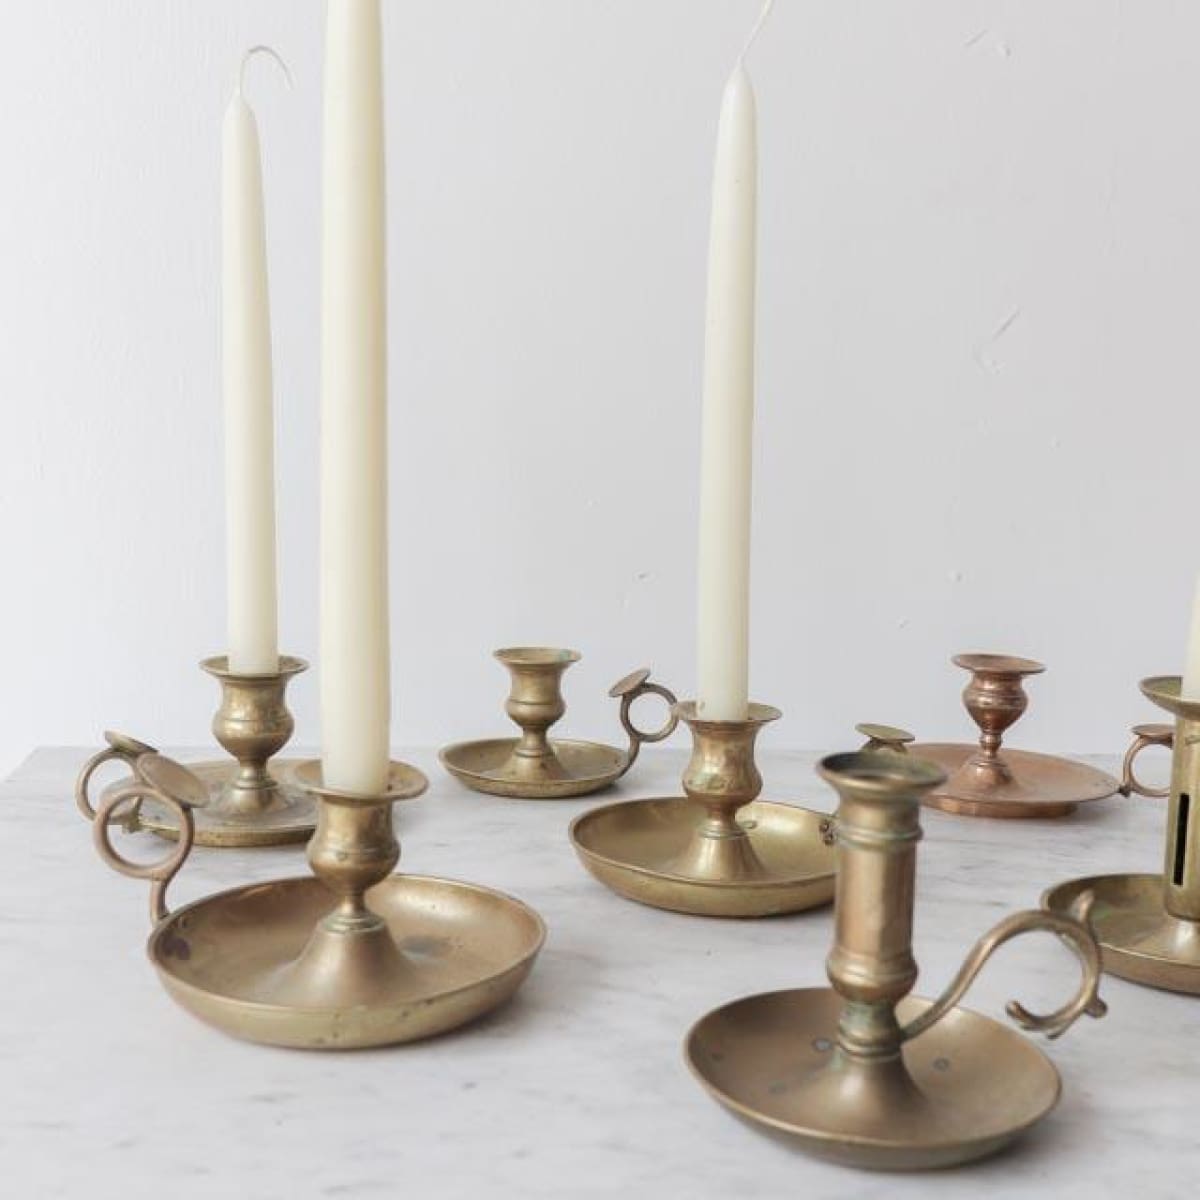 Bronze Antique American Countryside Vintage Metal Candle Holders Vintage  Sticks For Festivals, Restaurants, And Lawn Decor From Tikopo, $16.8